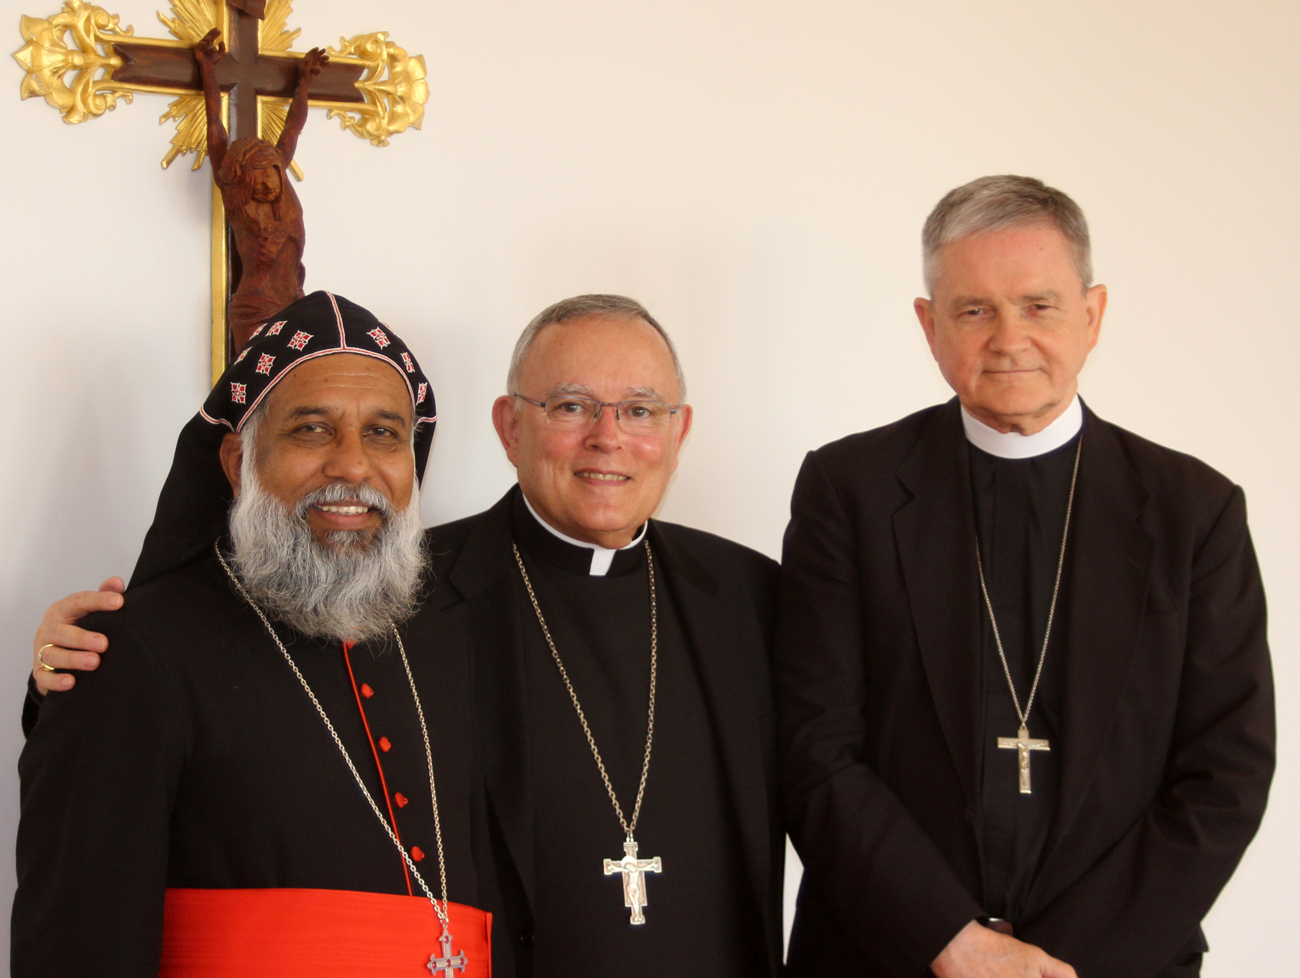 From left, Cardinal Baselios Cleemis, major archbishop of the Syro-Malankara Catholic Church, meets June 22 in Philadelphia with Archbishop Charles Chaput and Archbishop Edward Adams, a Philadelphia native priest and currently the Vatican’s apostolic nuncio to Greece, who coincidentally was in Philadelphia.